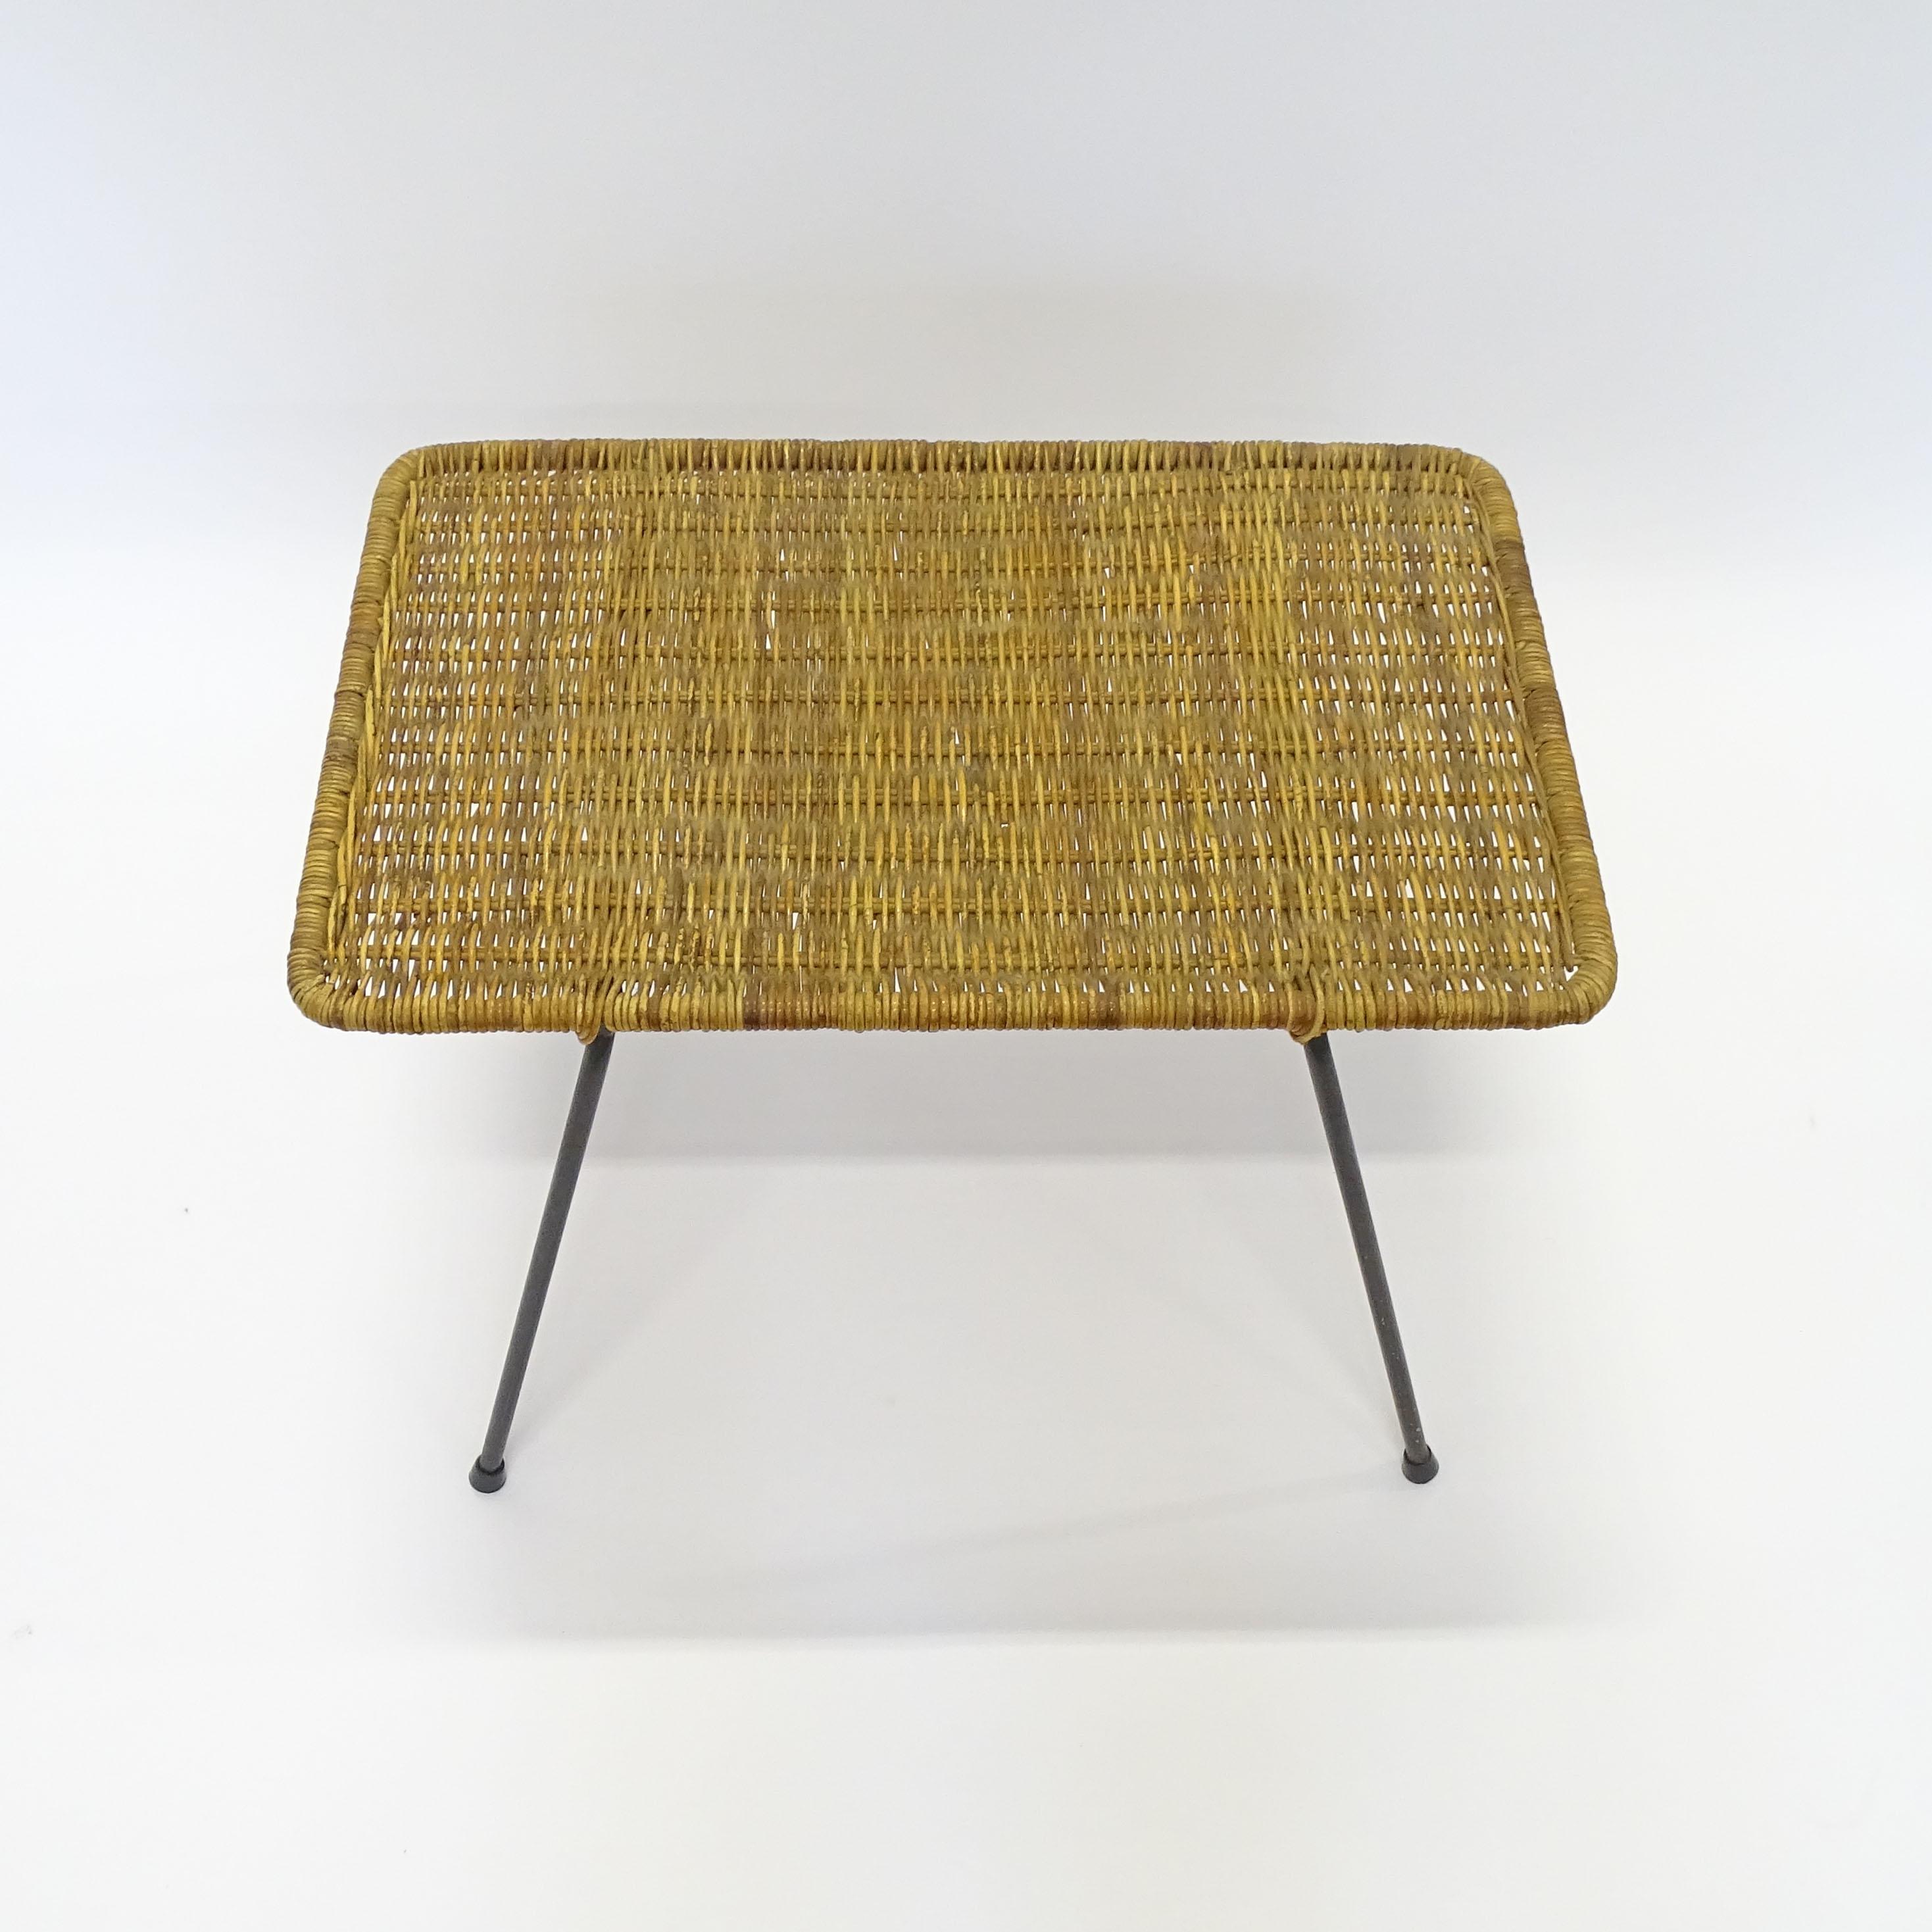 Italian 1950s Wicker and Metal Coffee Table In Good Condition For Sale In Milan, IT